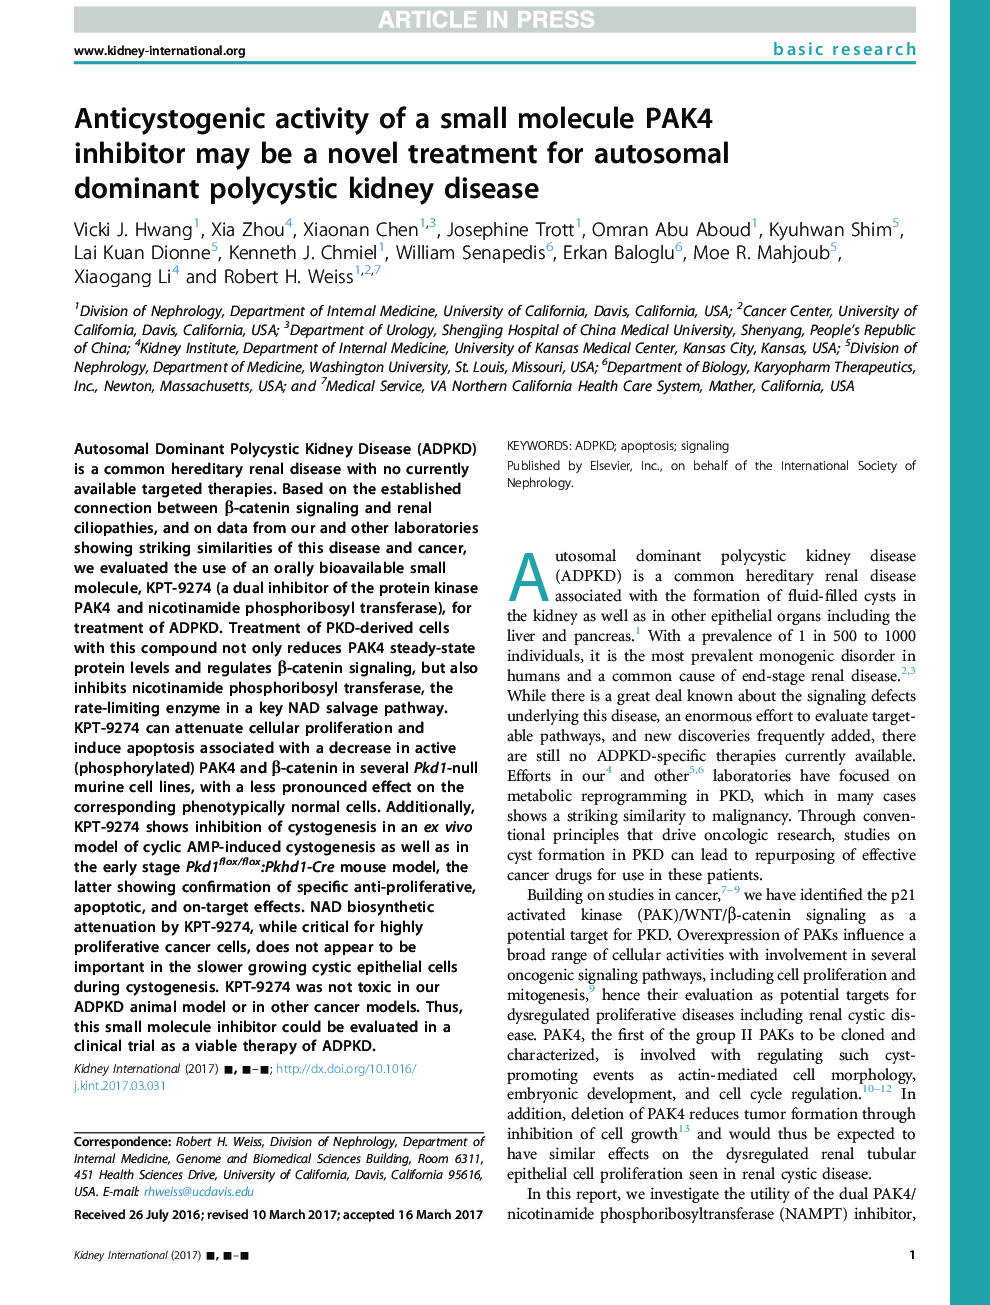 Anticystogenic activity of a small molecule PAK4 inhibitor may be a novel treatment for autosomal dominant polycystic kidney disease